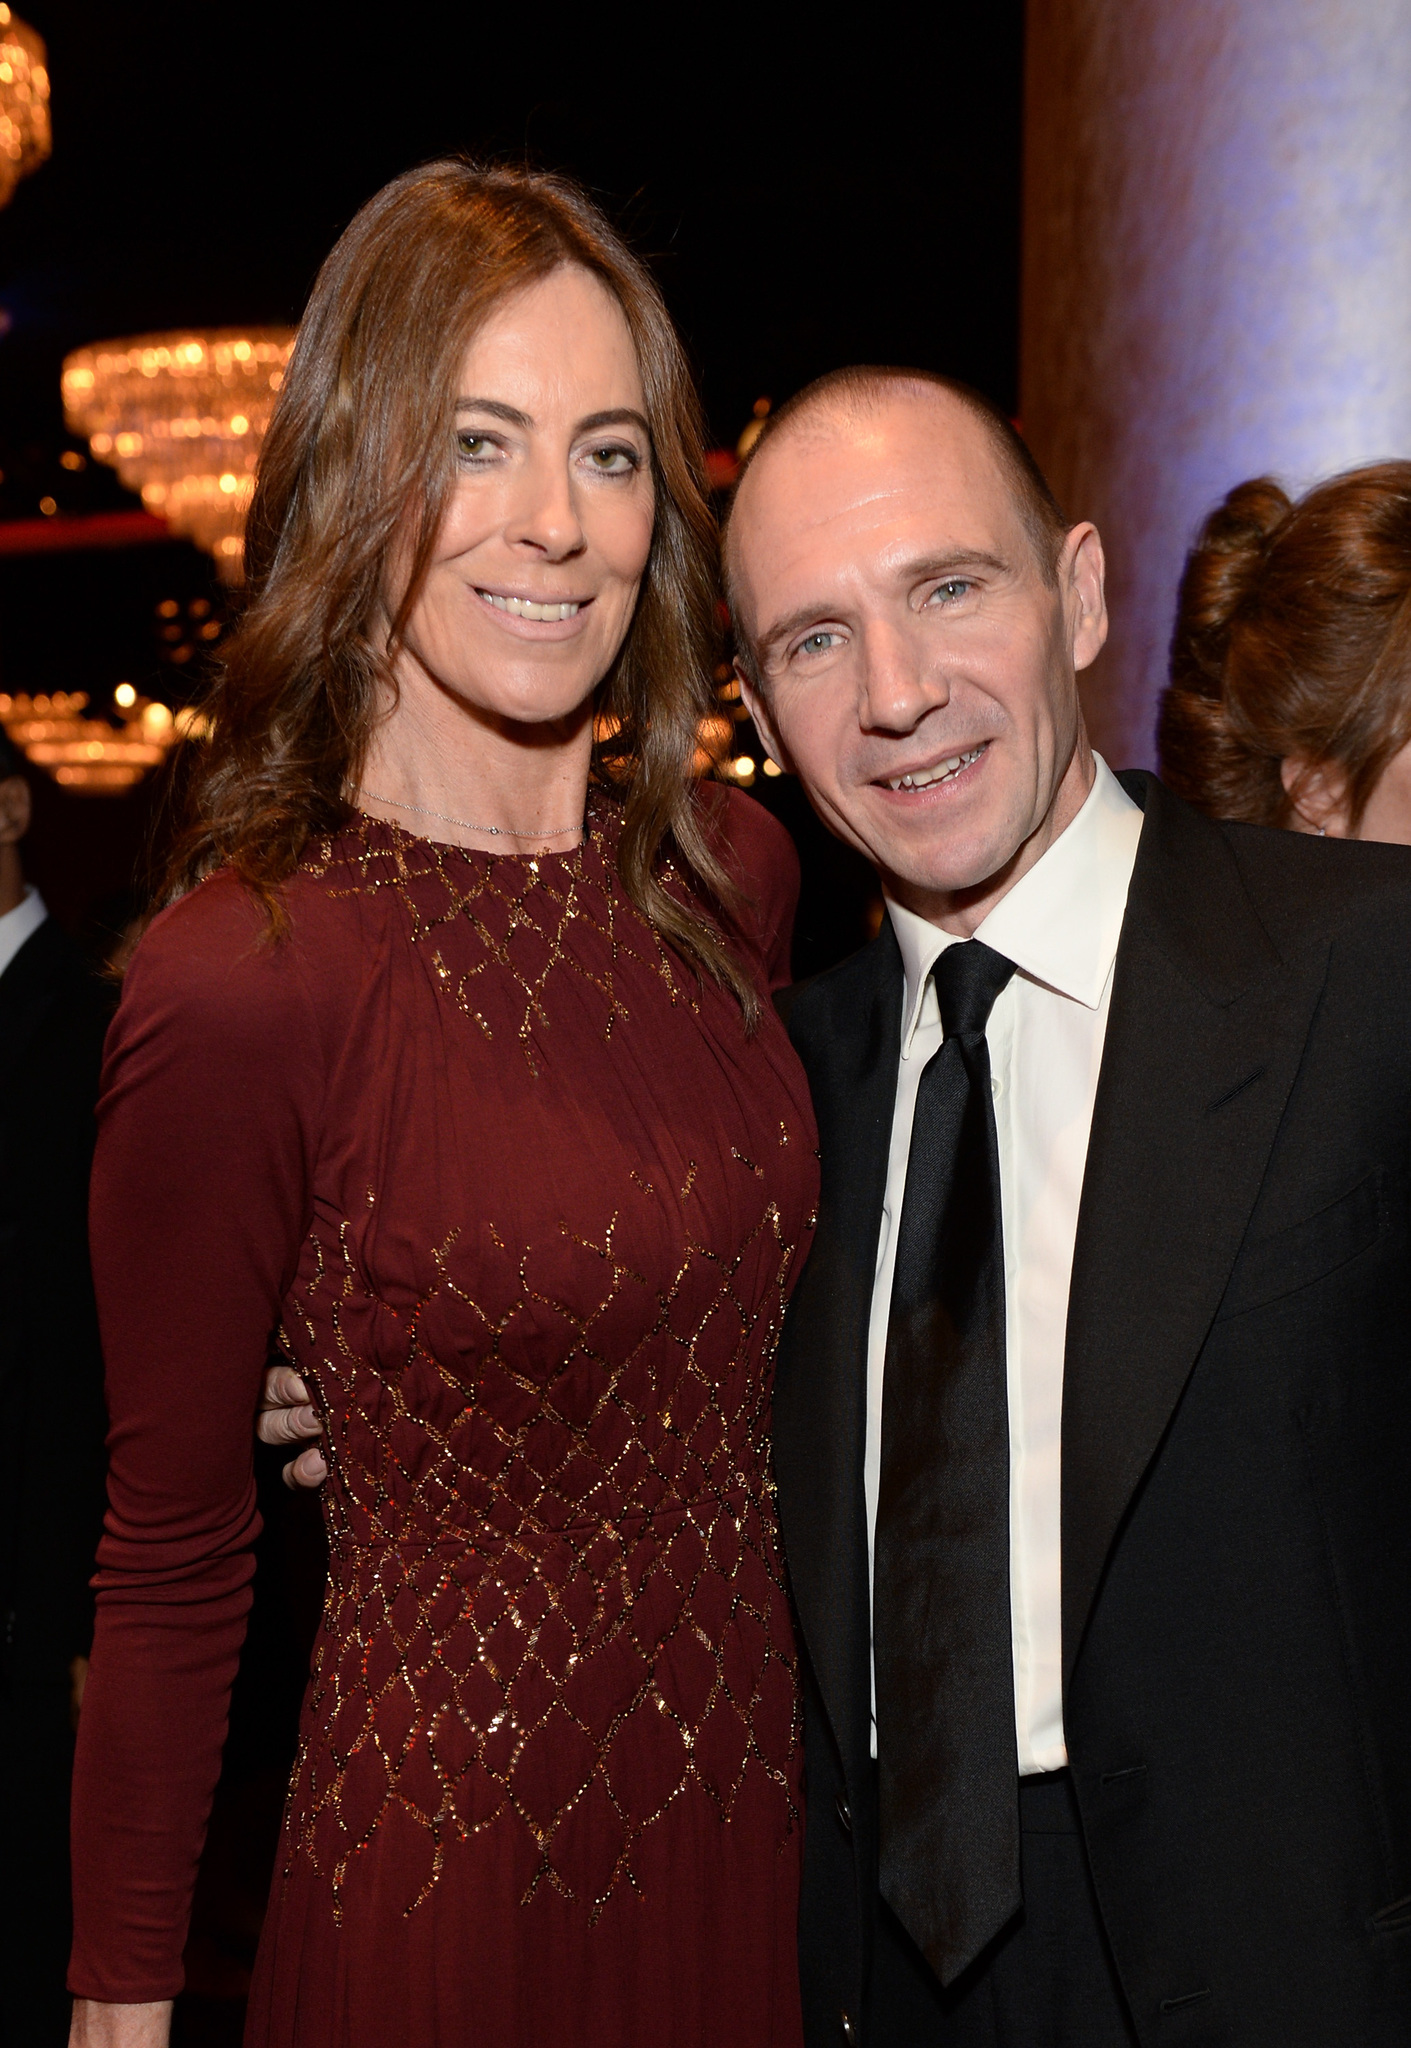 Ralph Fiennes and Kathryn Bigelow